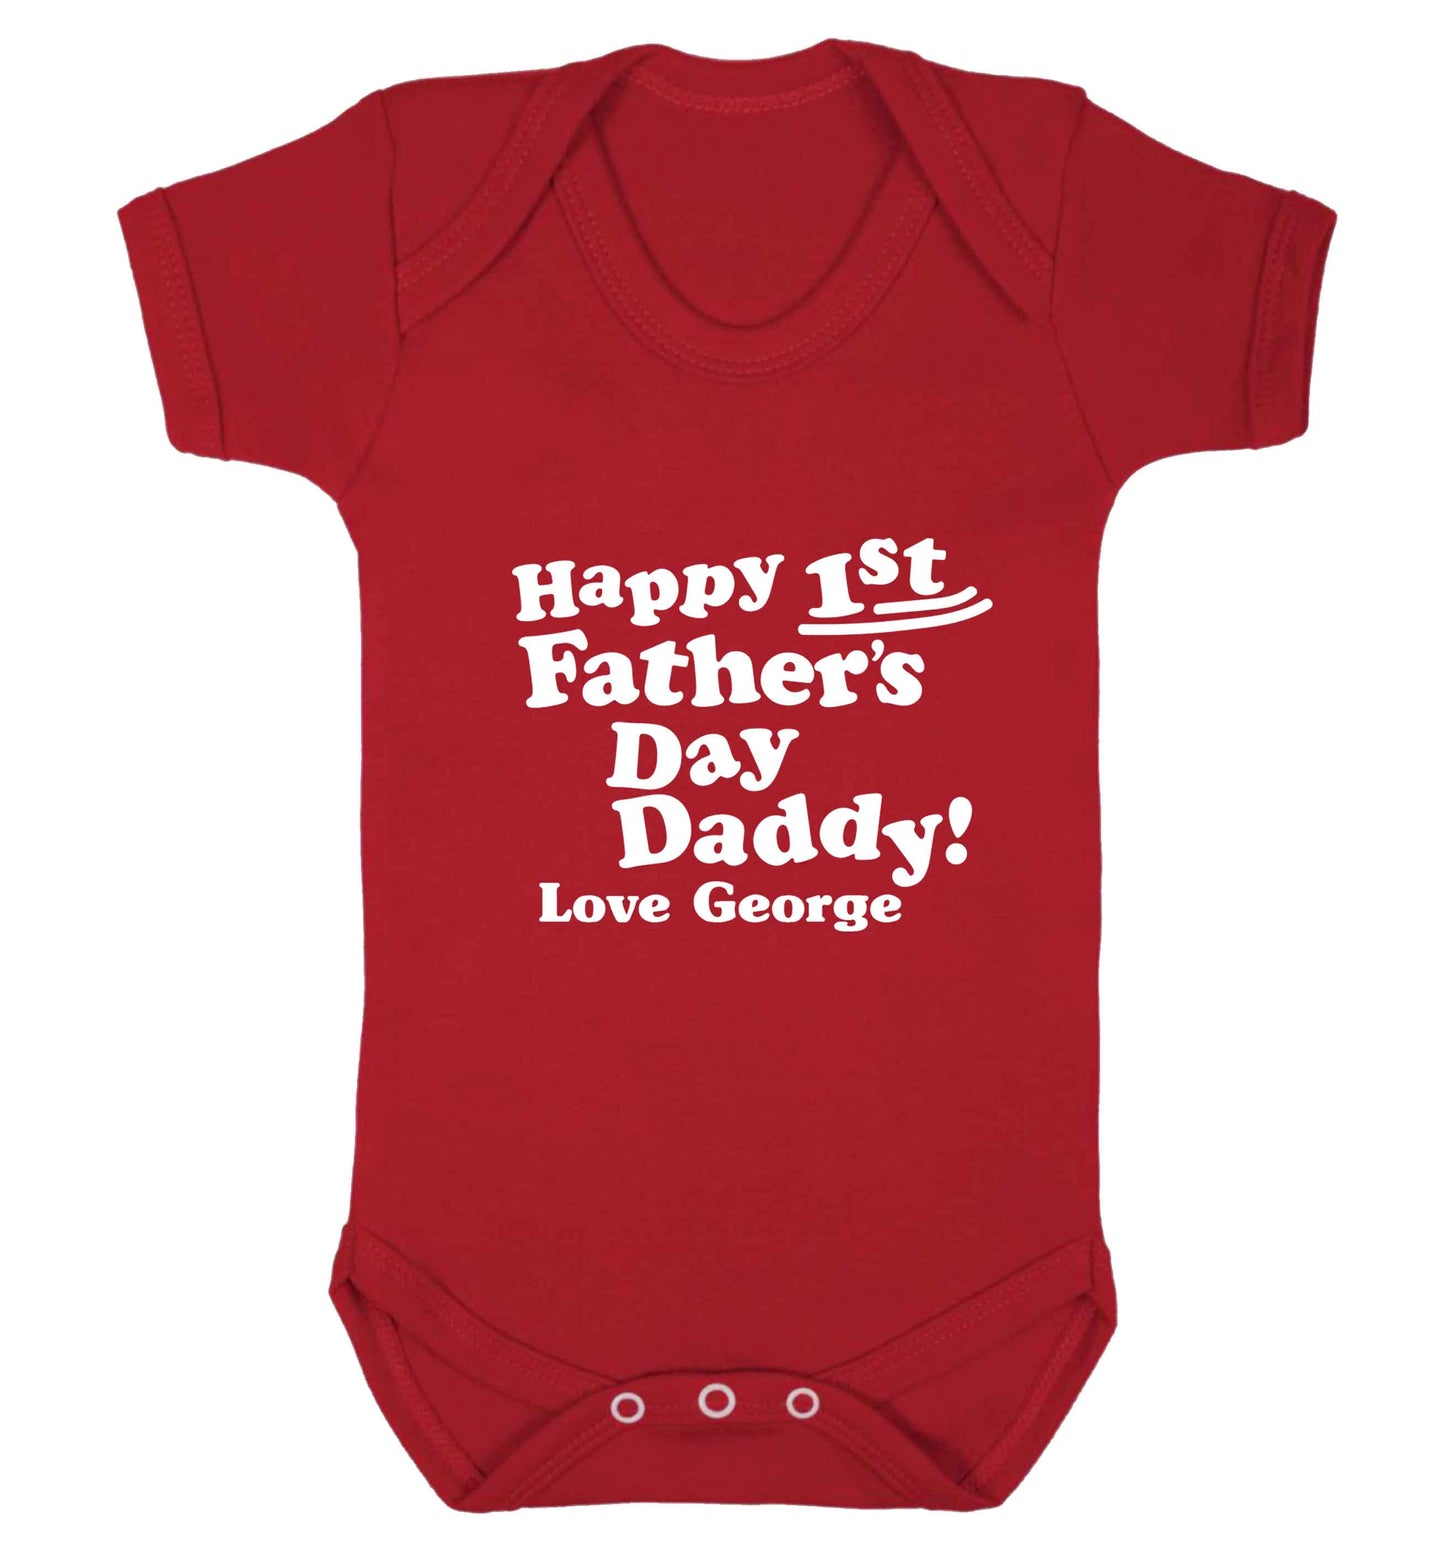 Happy first Fathers Day daddy love personalised baby vest red 18-24 months